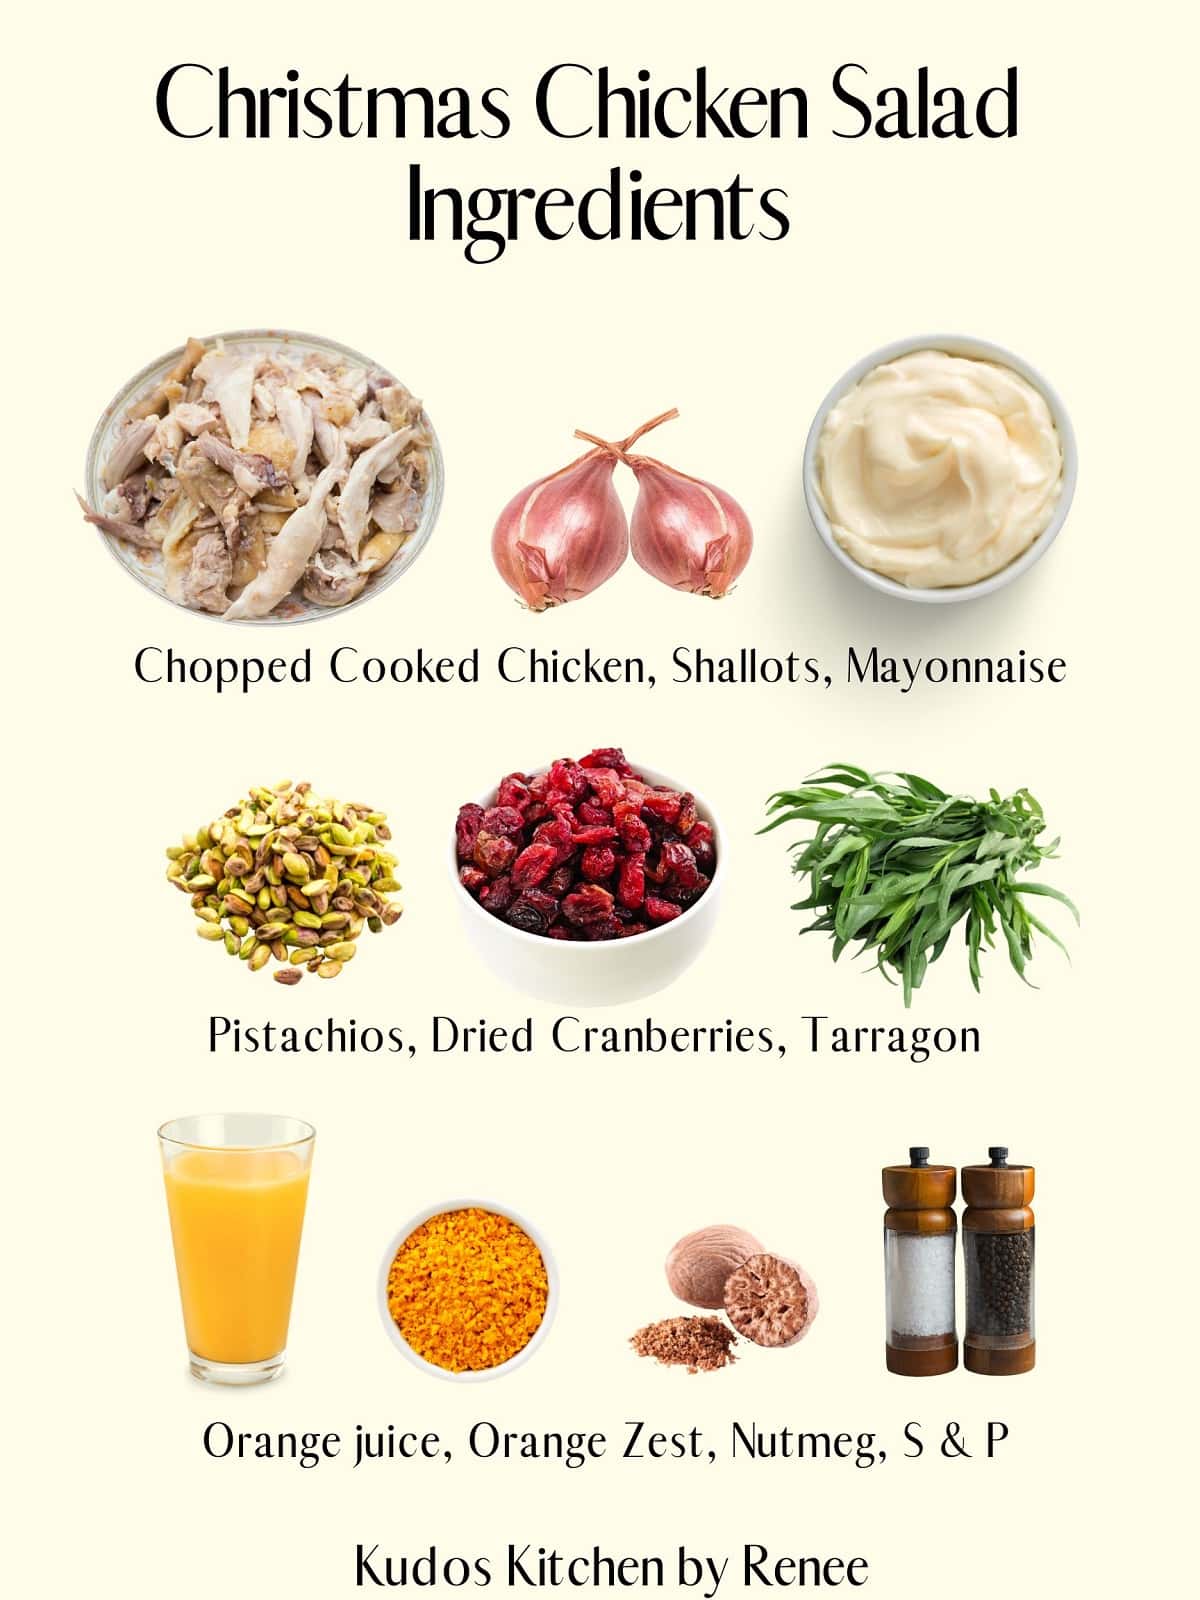 A visual ingredient list for making Christmas Chicken Salad. 